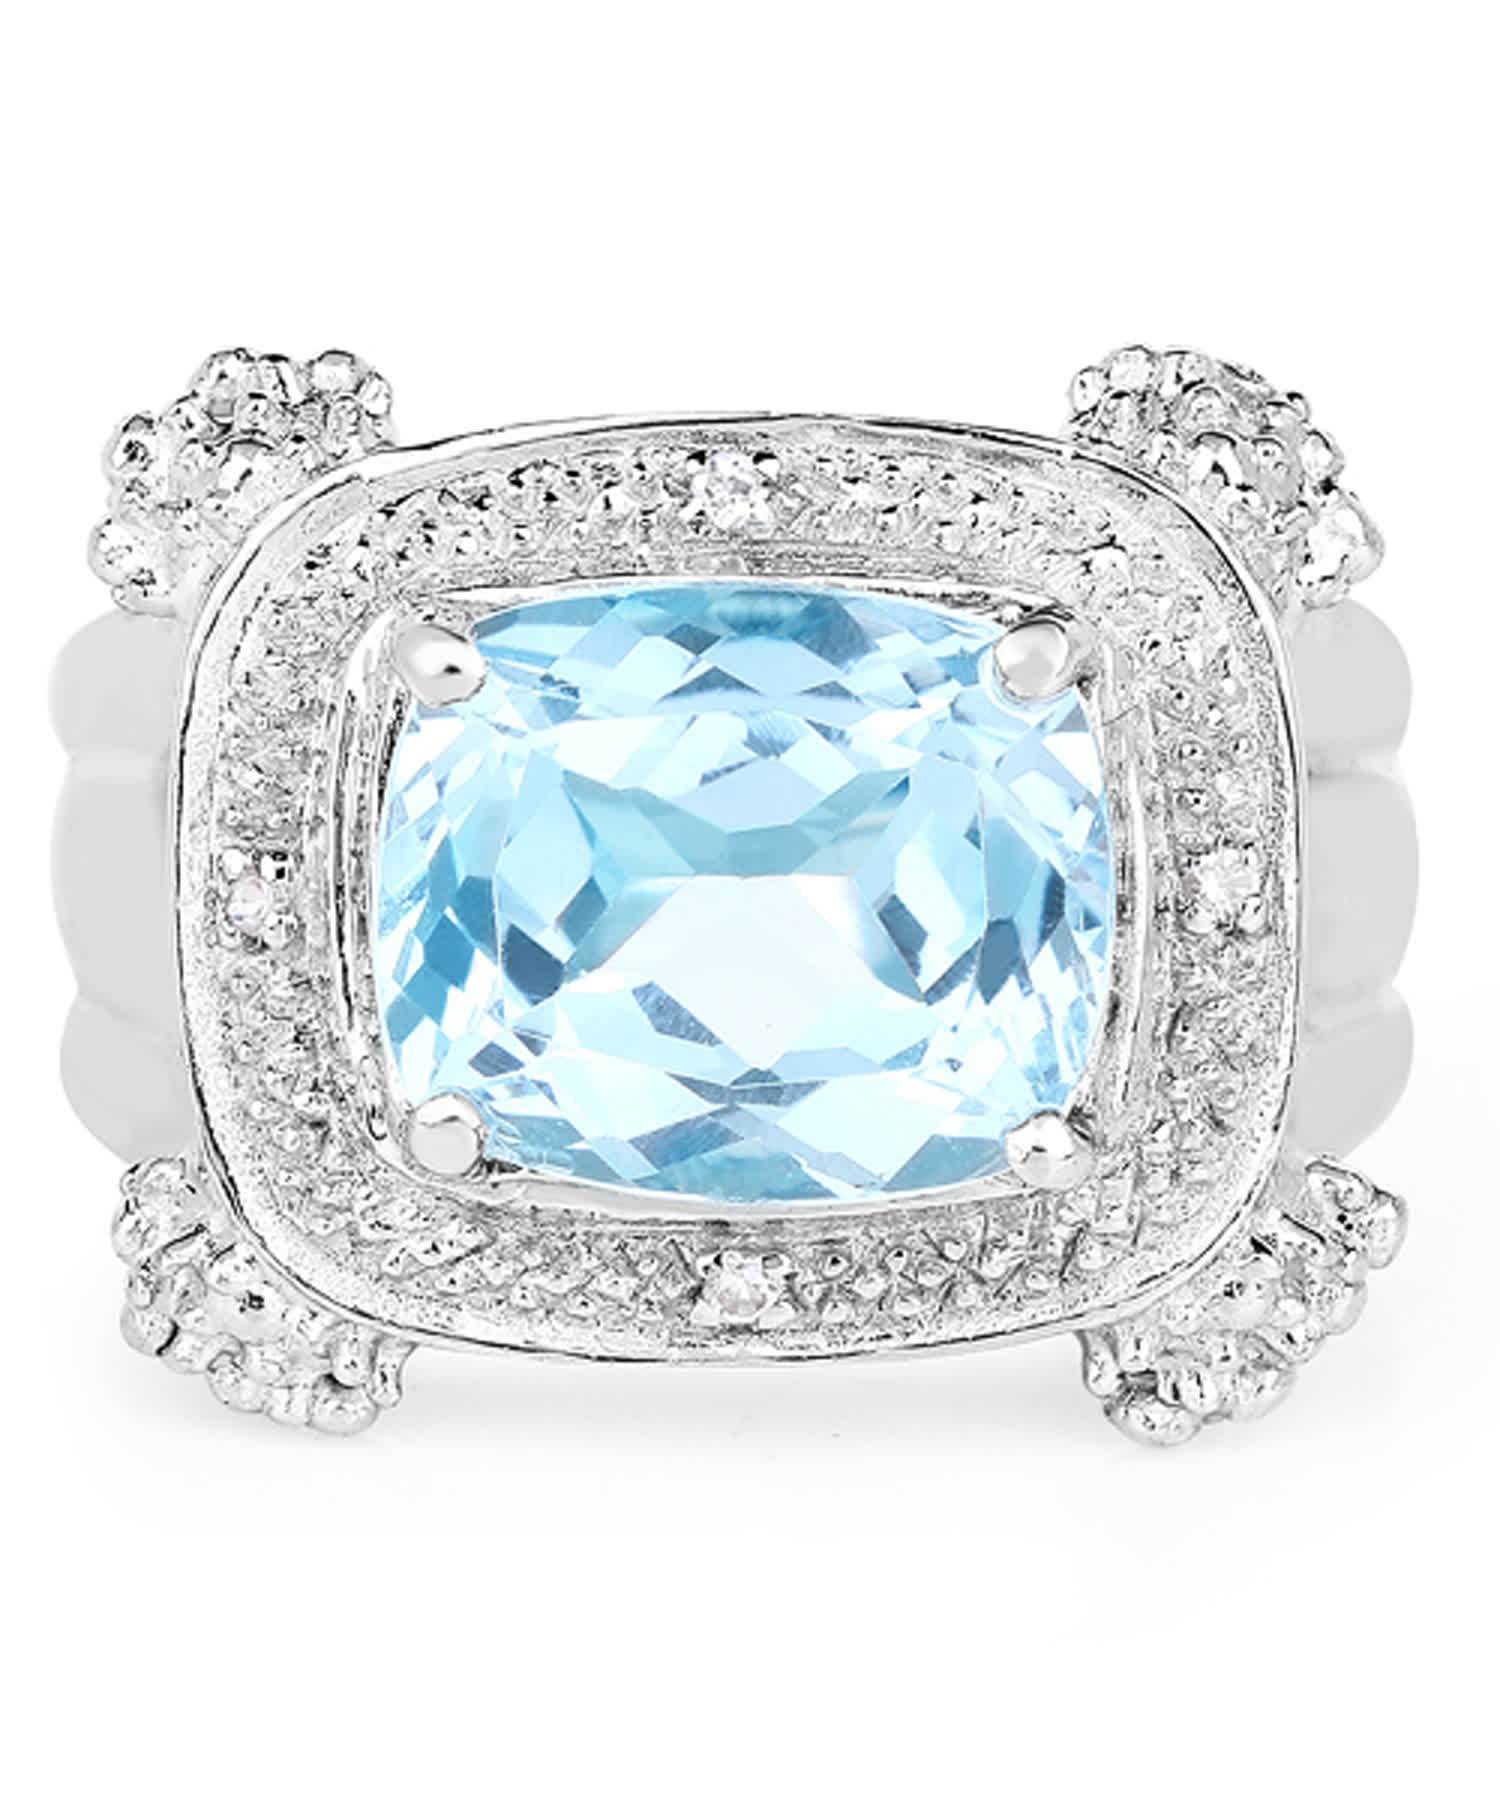 4.90ctw Natural Sky Blue Topaz Rhodium Plated Cocktail Ring View 3